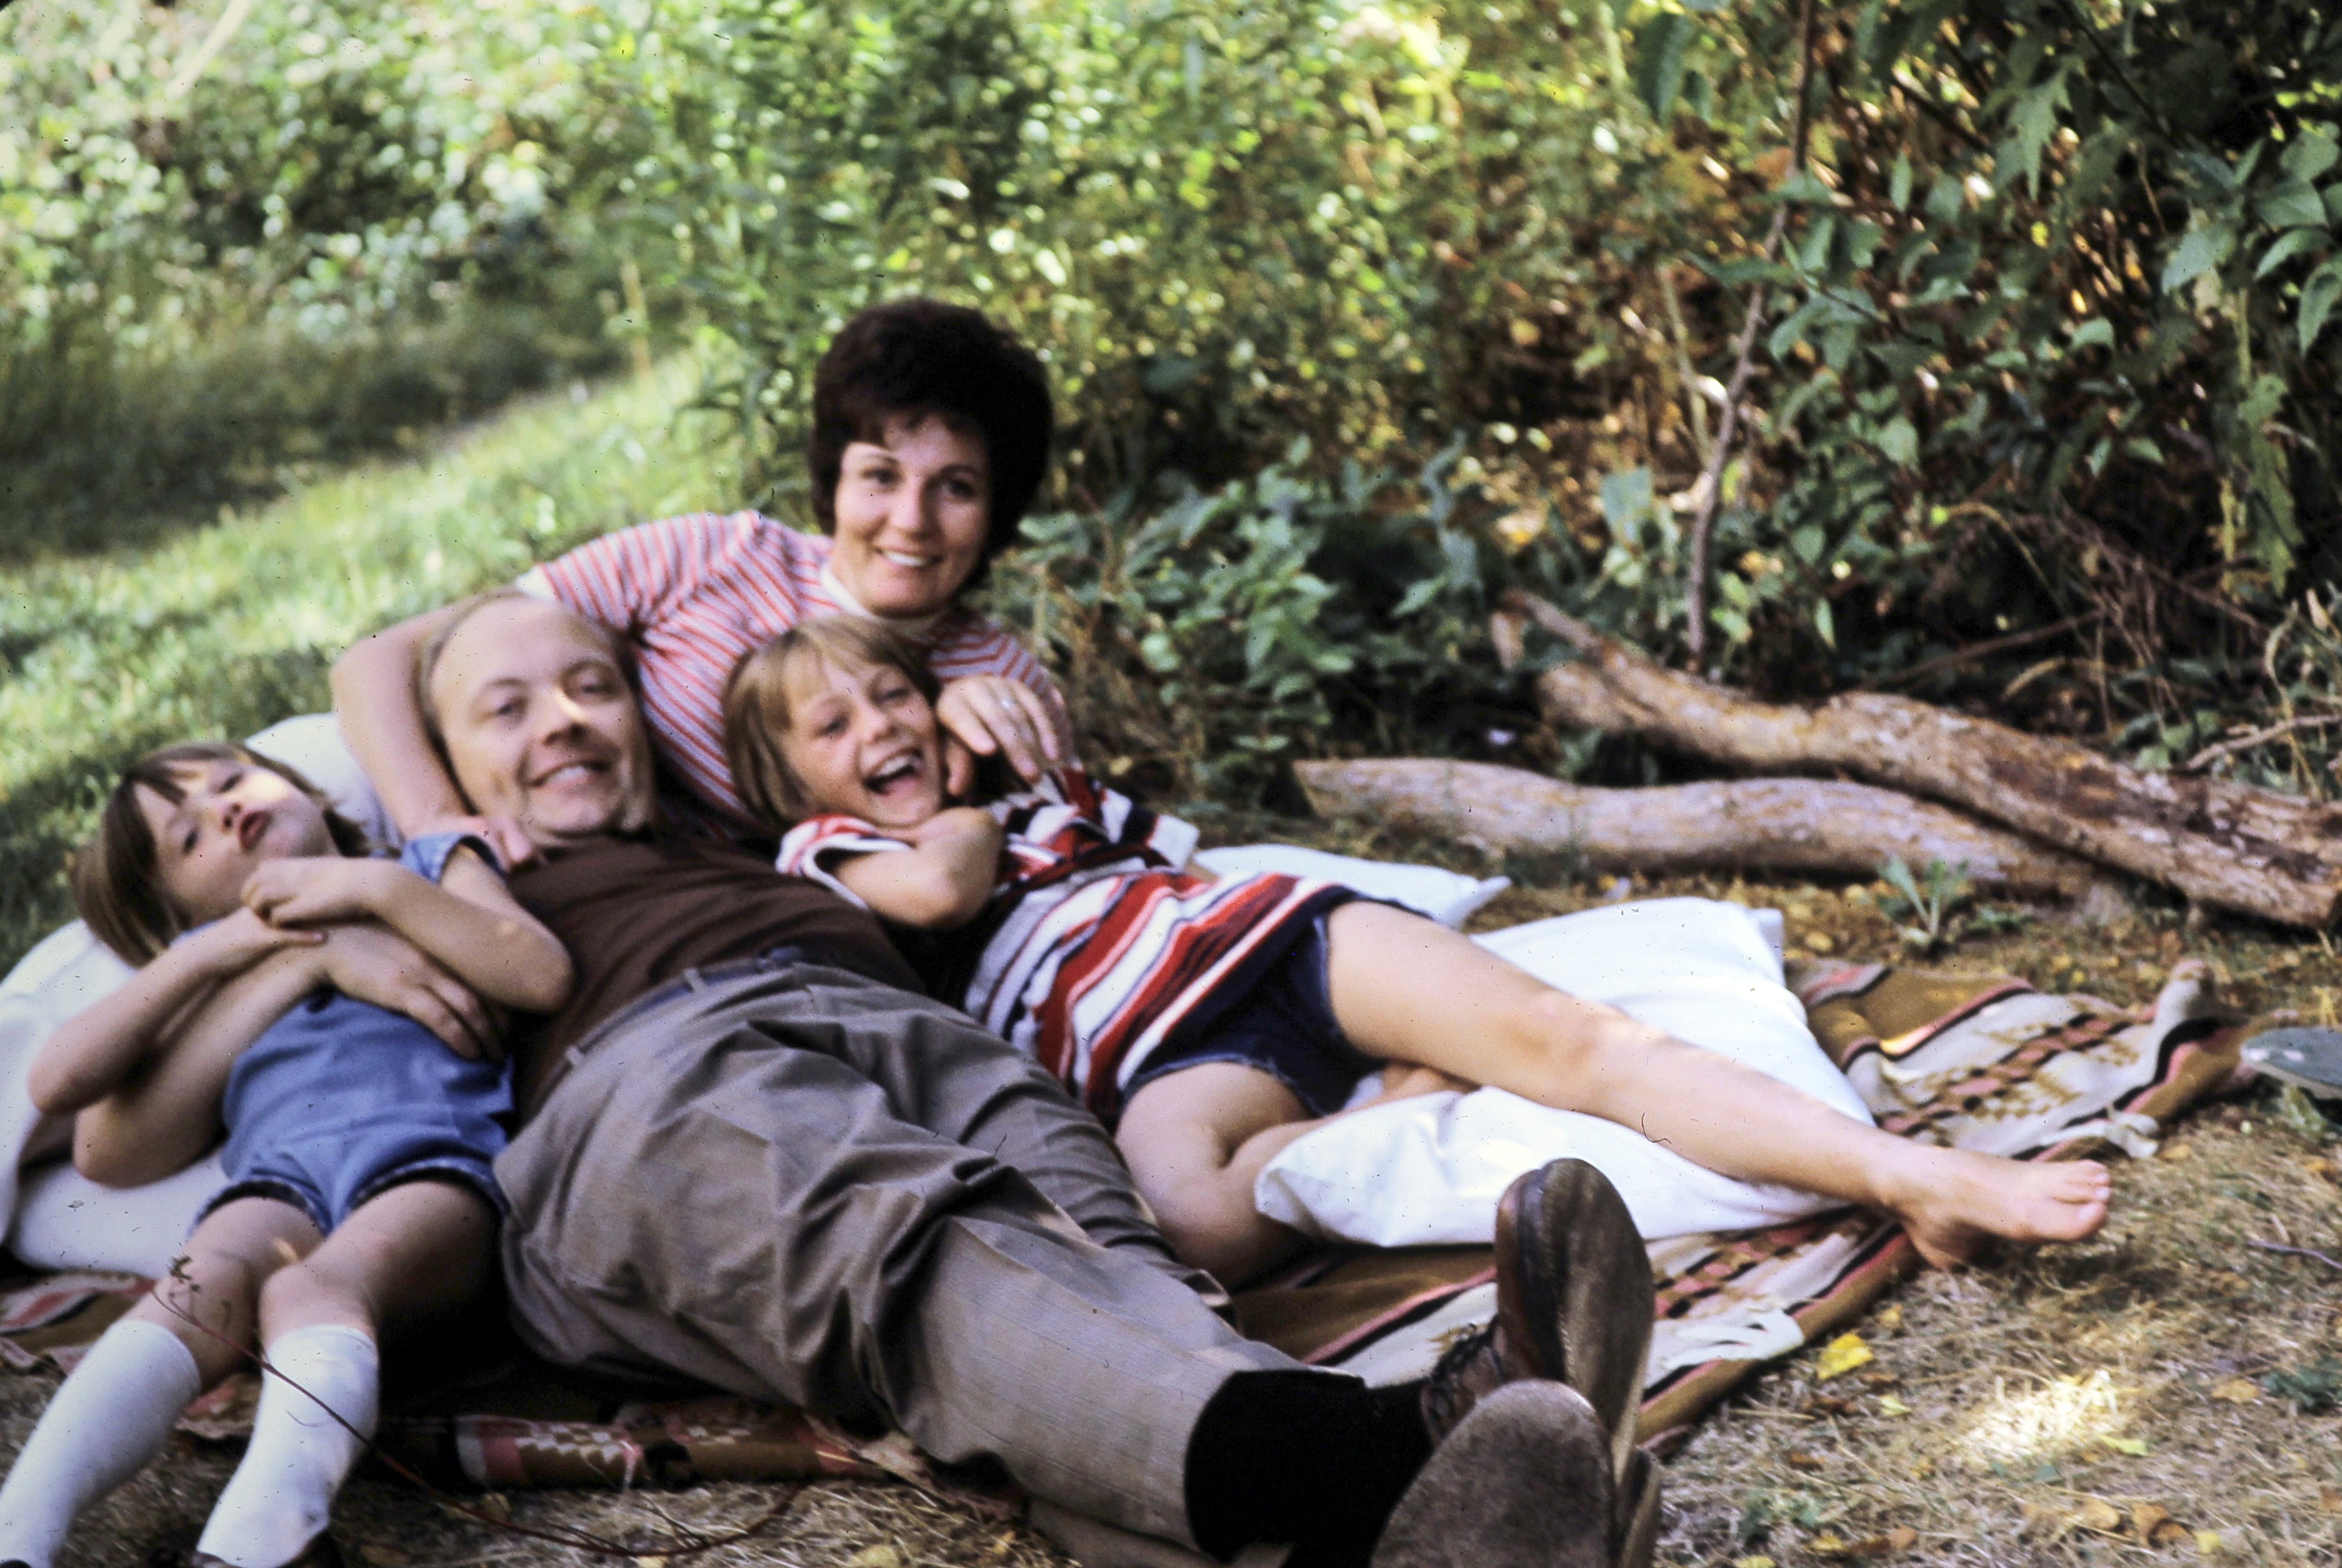 The Brobergs picnic in the mountains in 1971, three years before family friend Bob “B” Berchtold kidnapped their oldest daughter